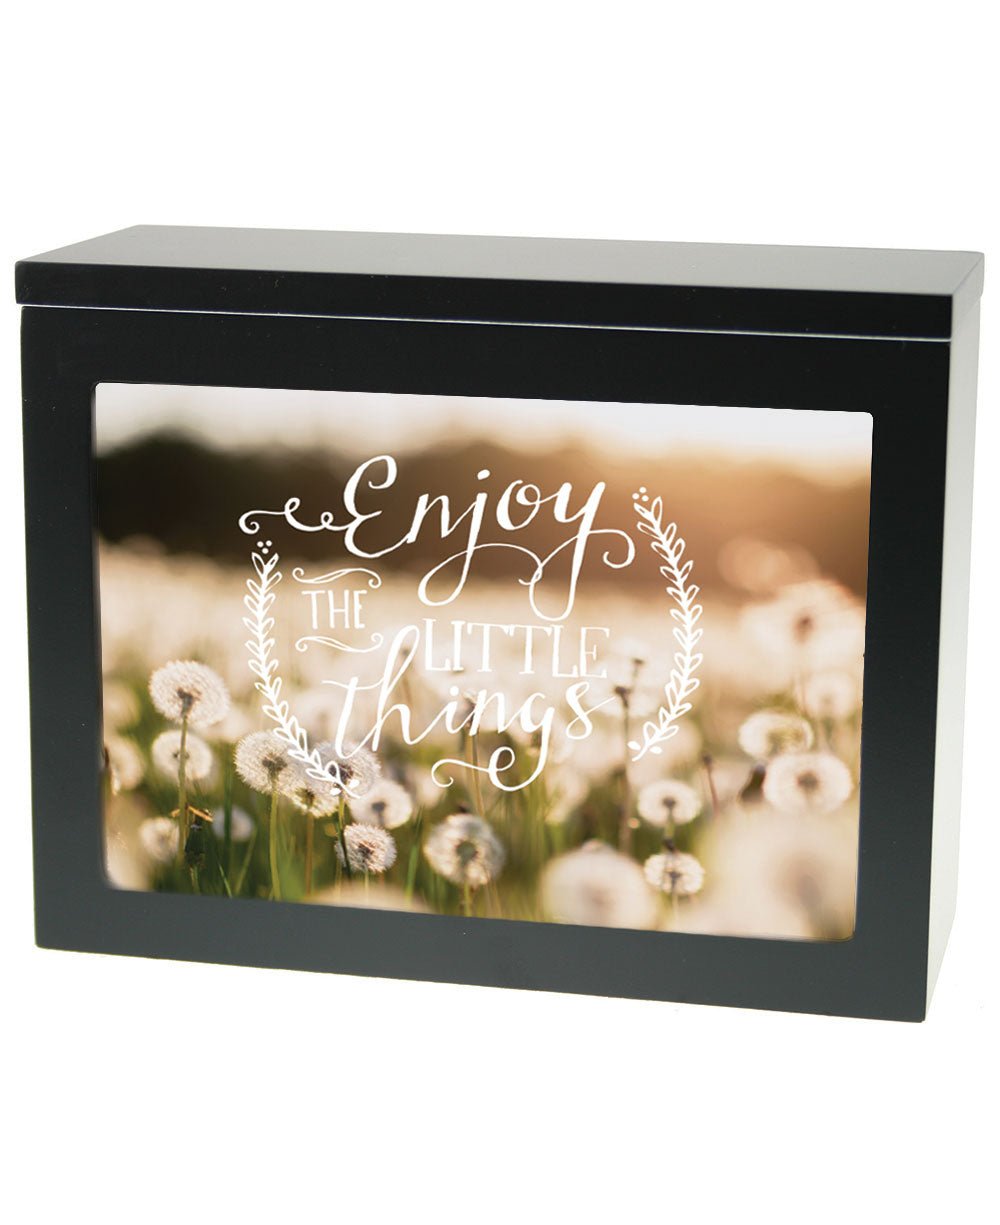 Shine On Inspirational Photo Light Box - Thoughtful Accents Enjoy The Little Things